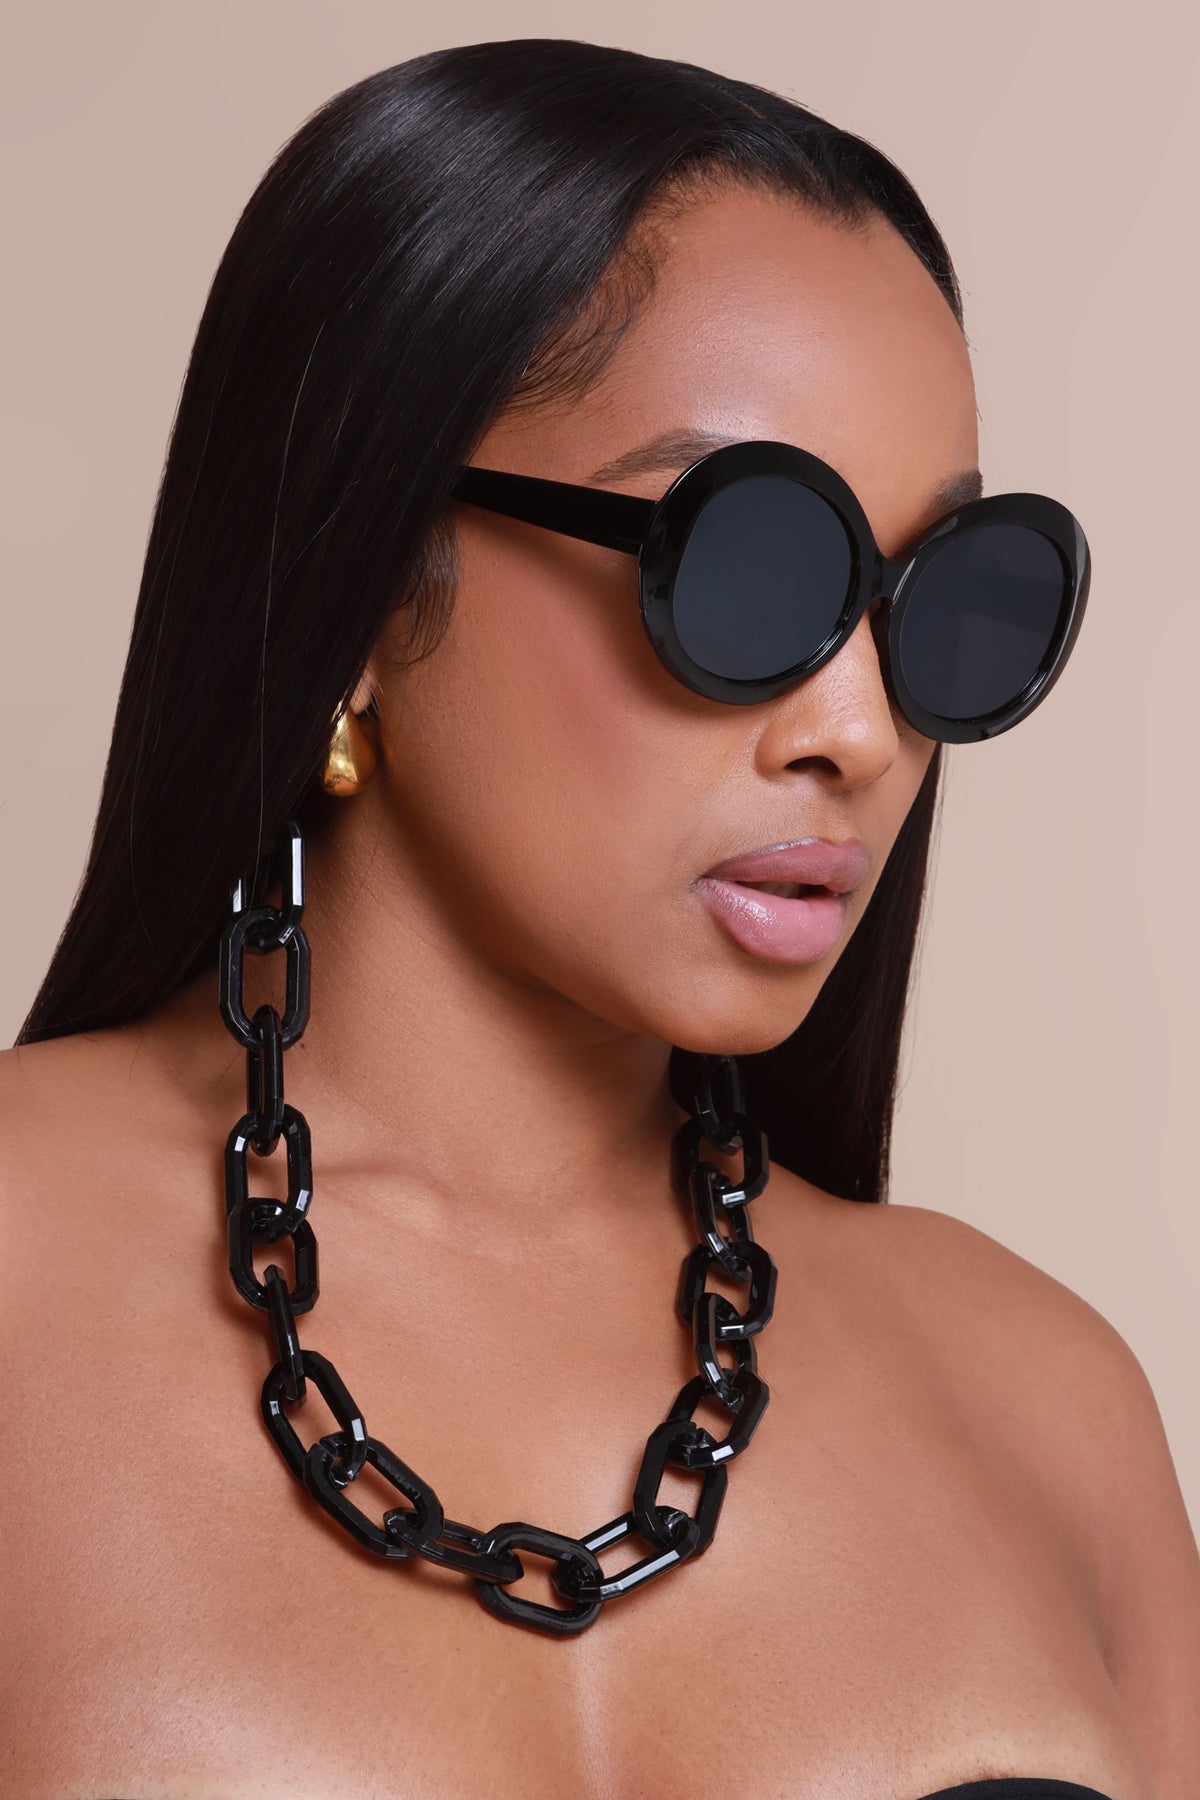 
              Sneaky Link Rounded Chainlink Sunglasses - Black - Swank A Posh
            